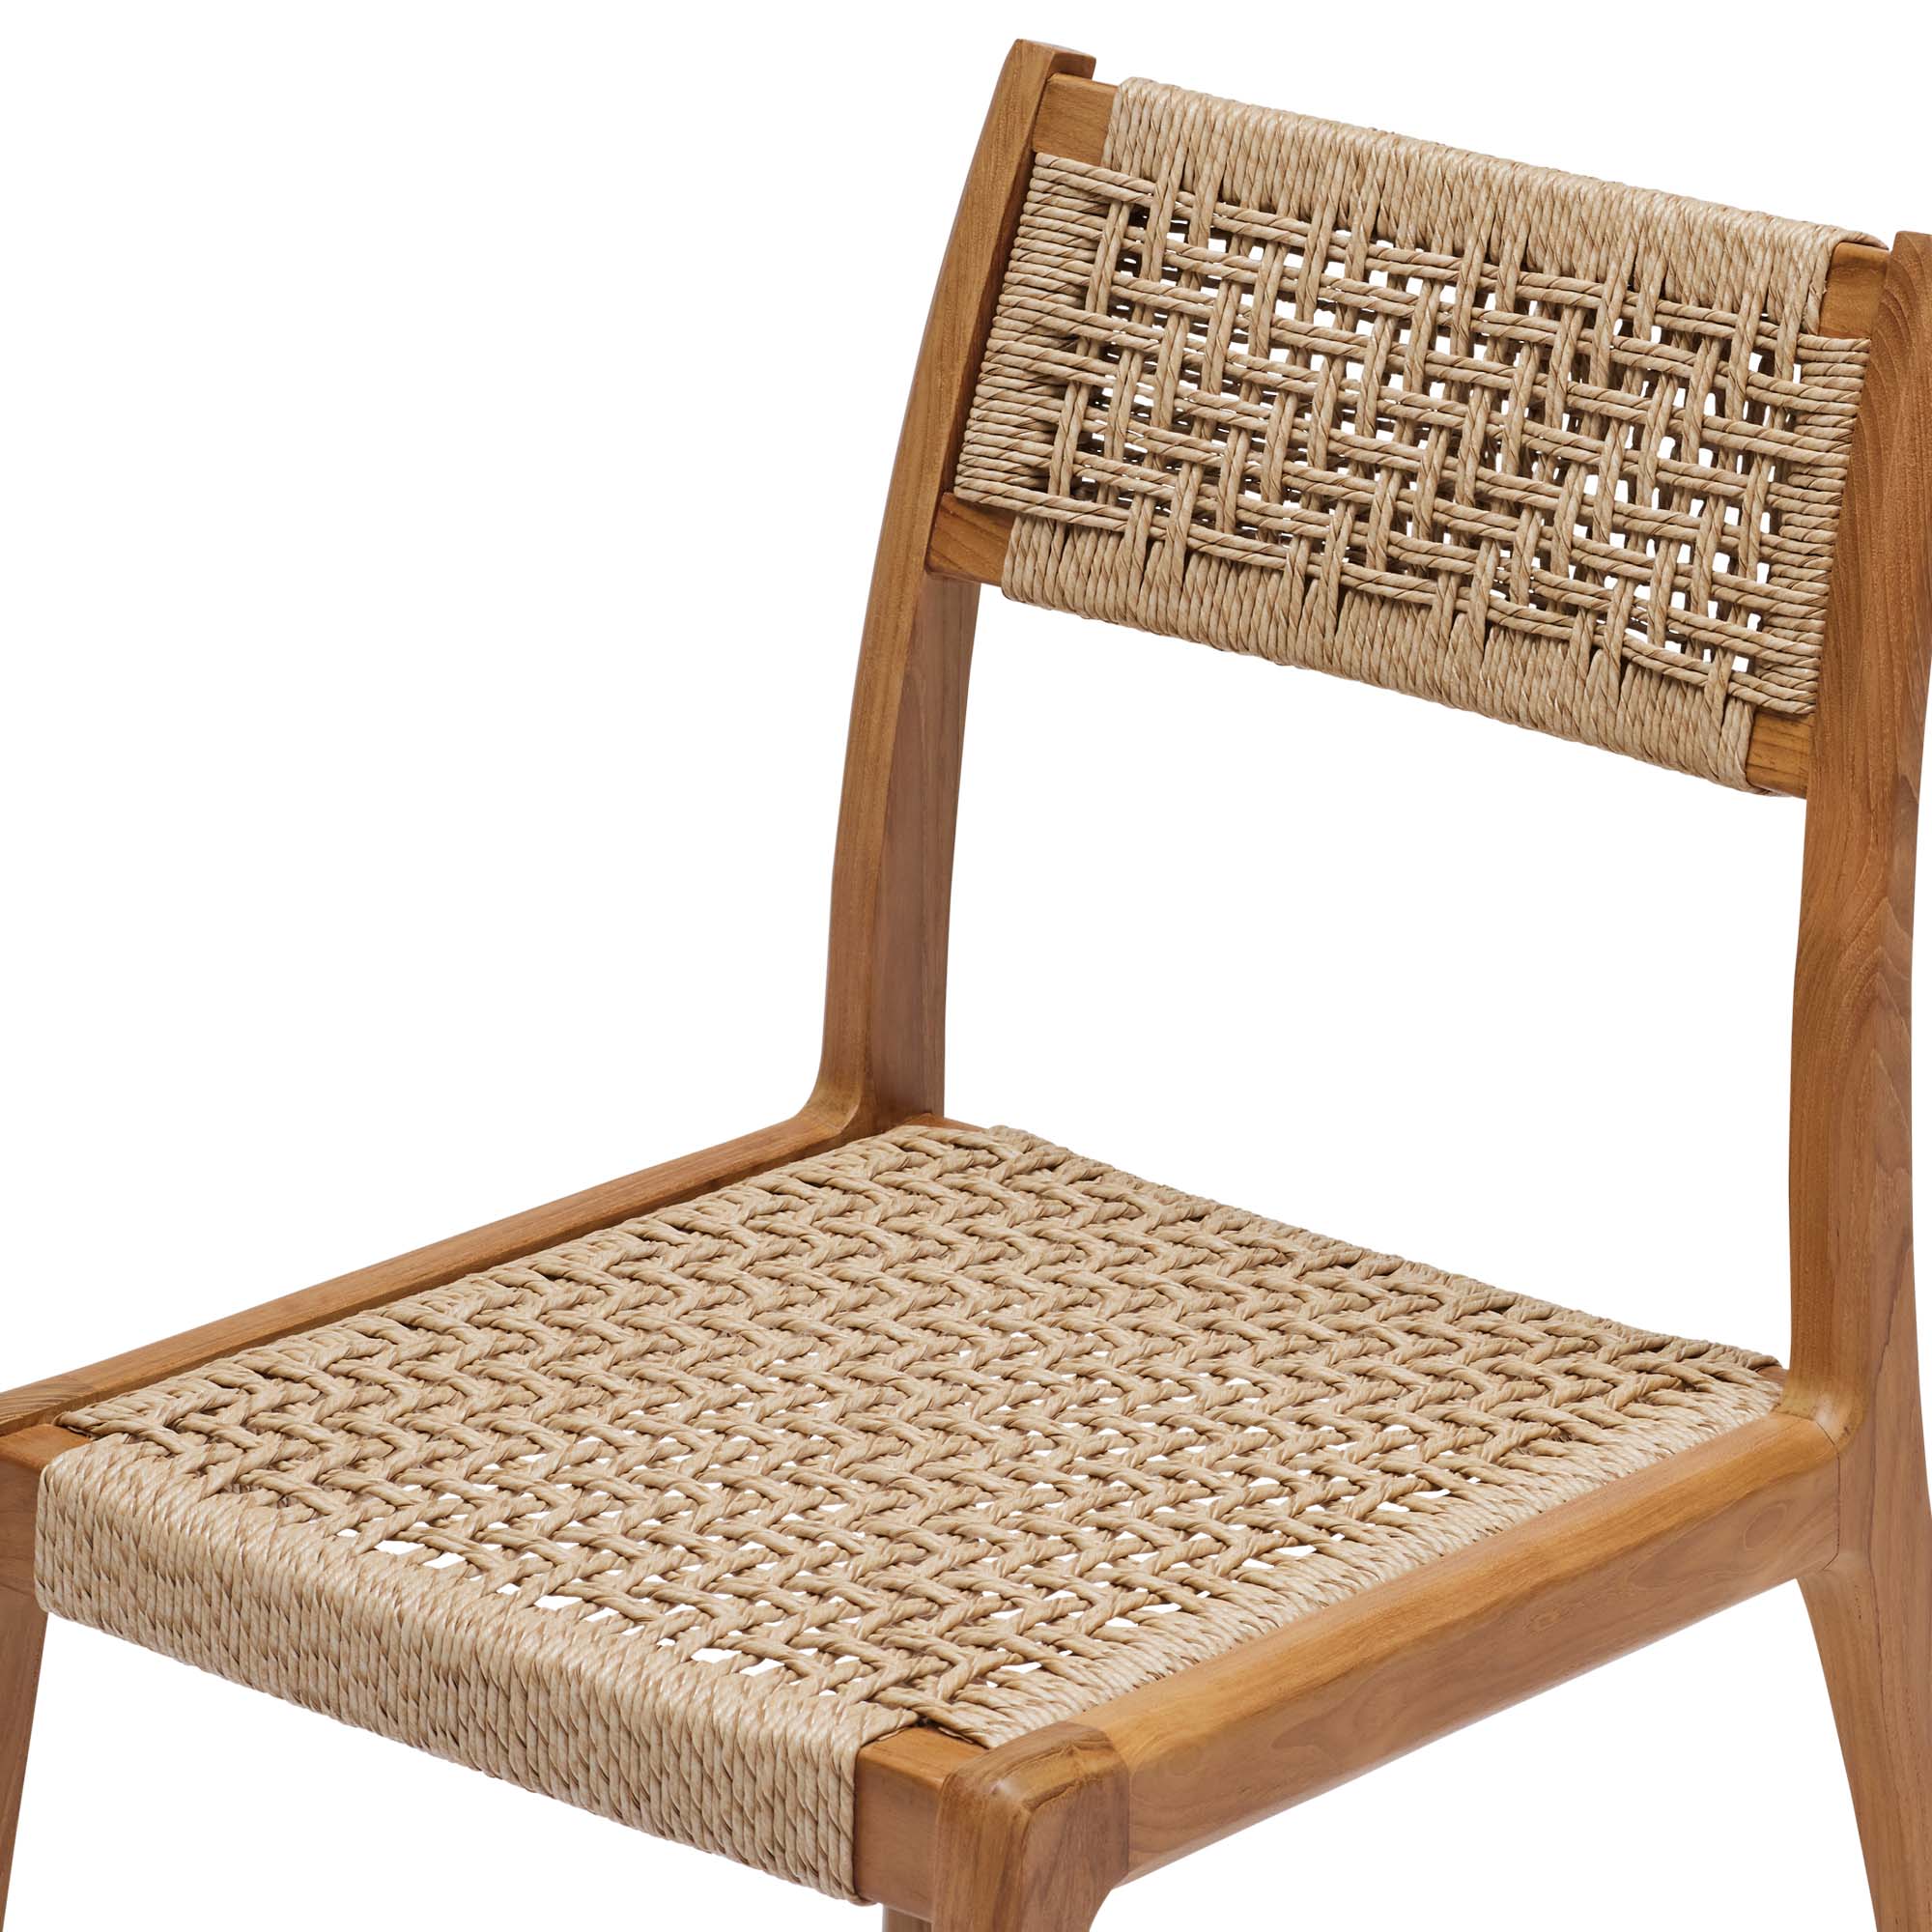 Piper Outdoor Dining Chair